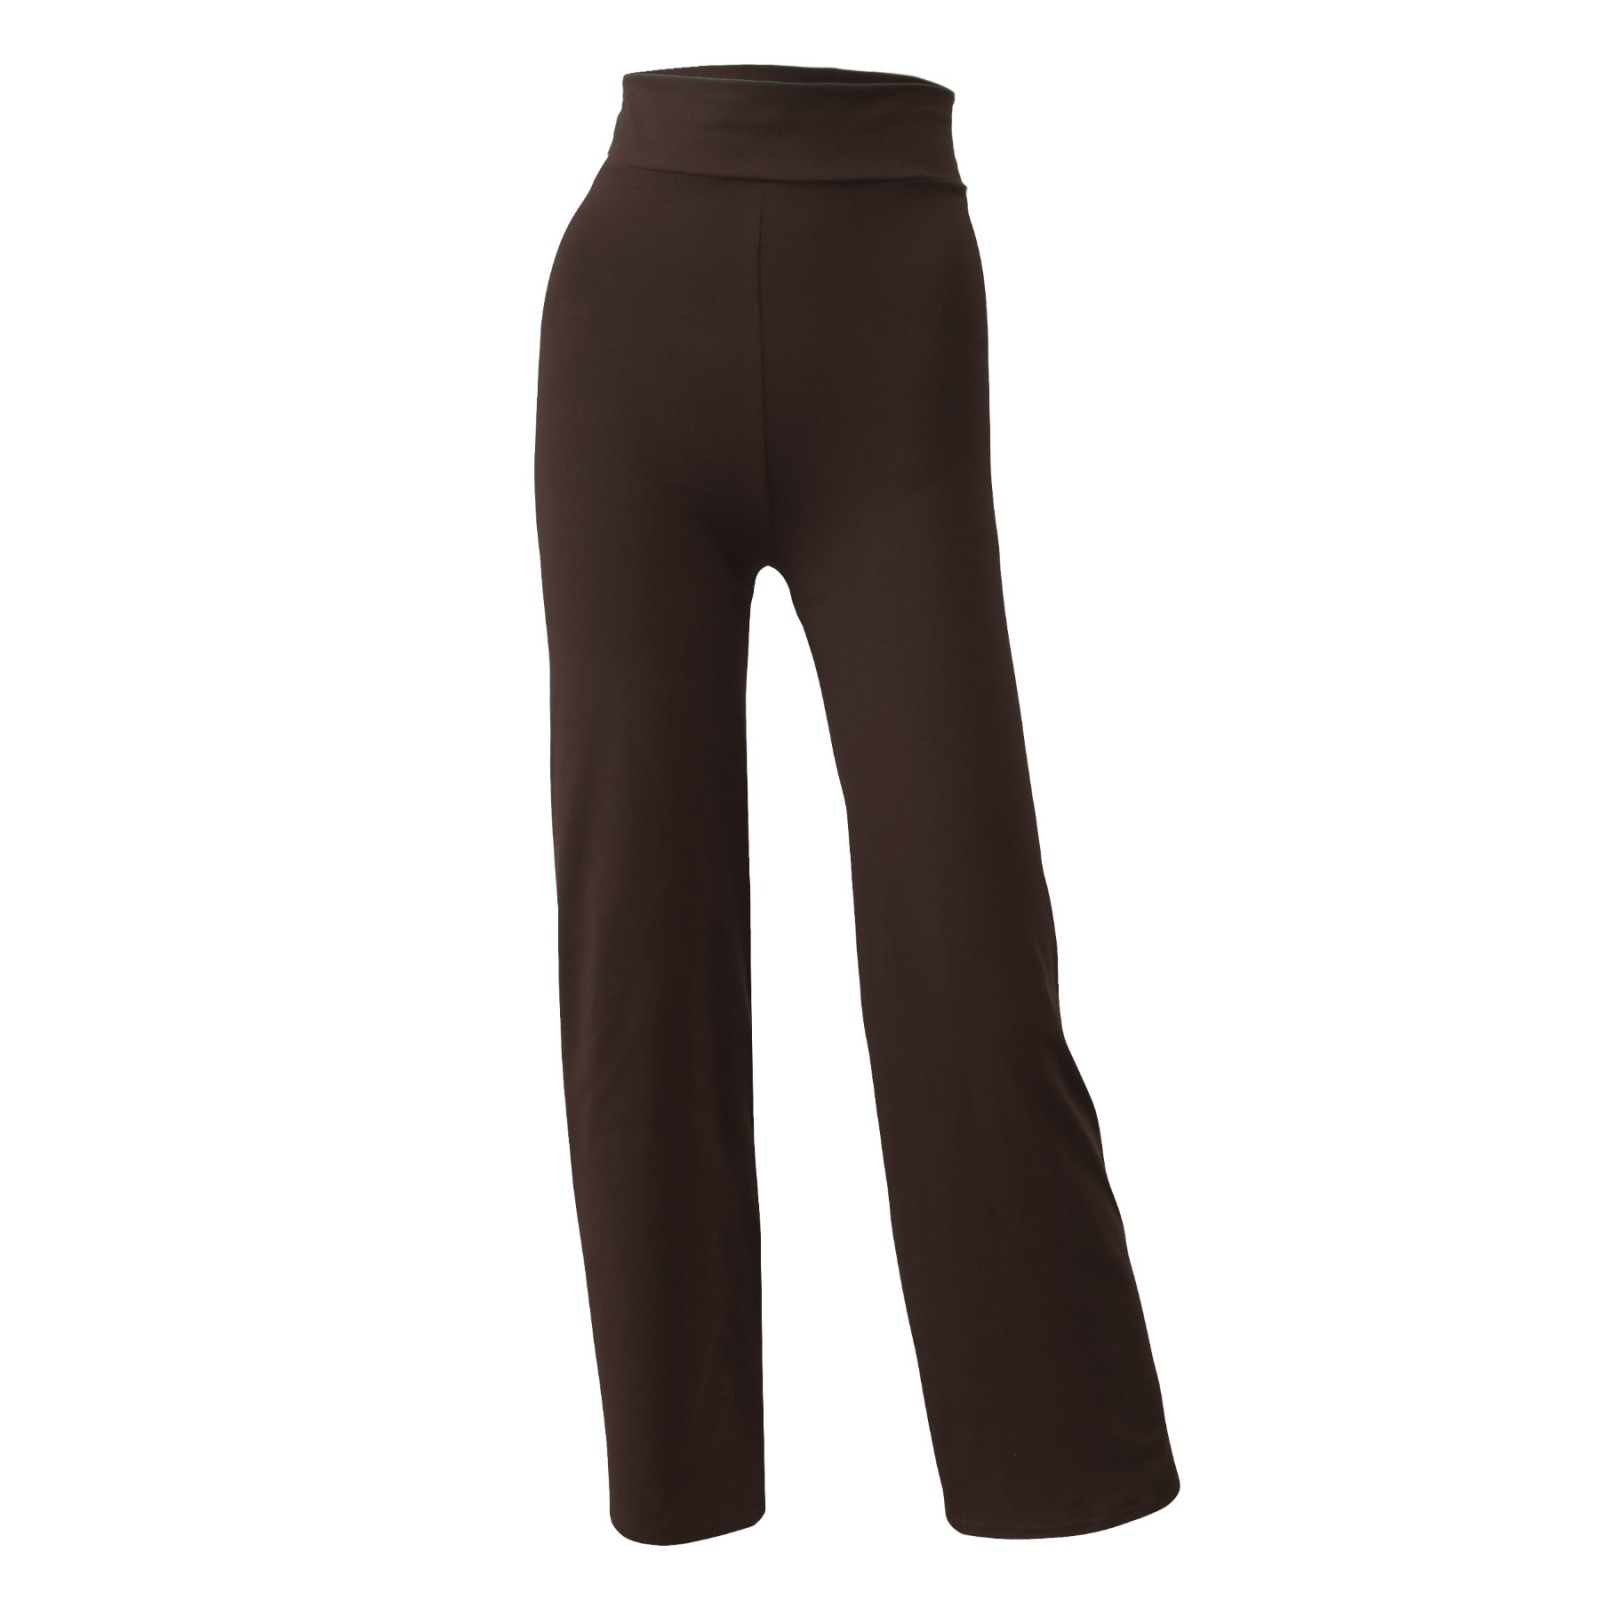 Yogahose Relaxed Fit braun